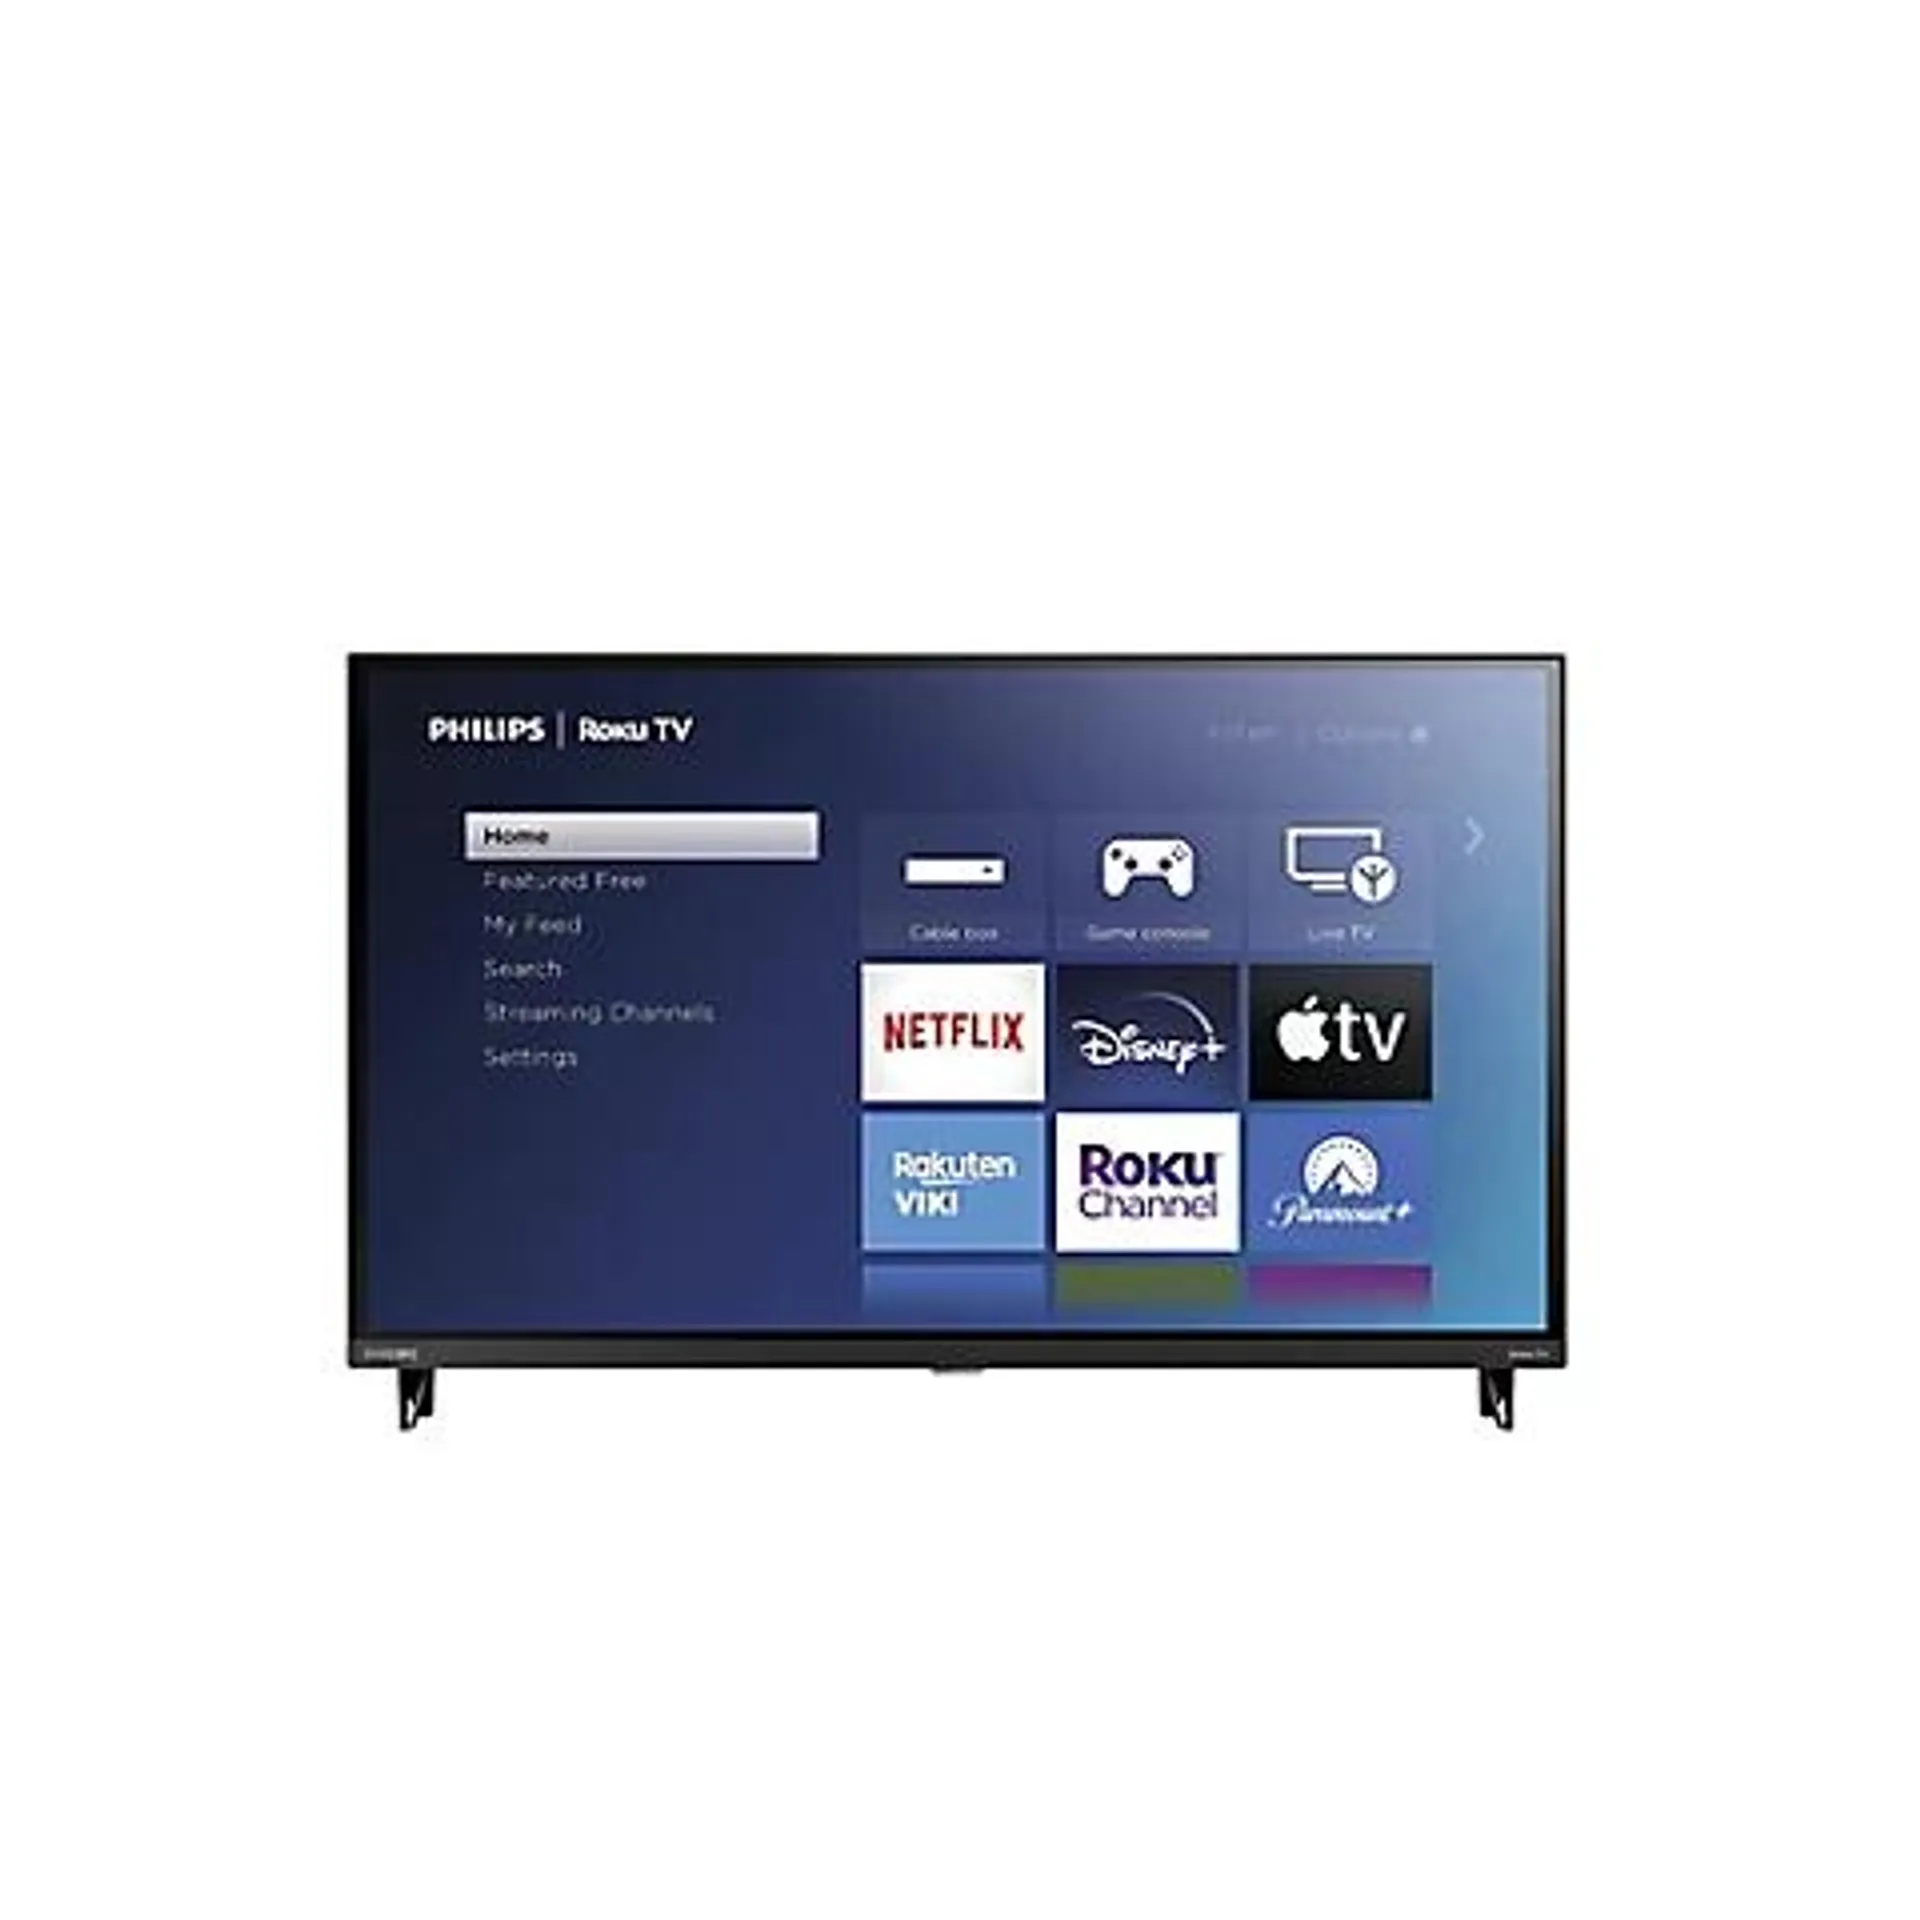 Philips 32" PFL64 HD Roku Smart TV with 3-Year Coverage